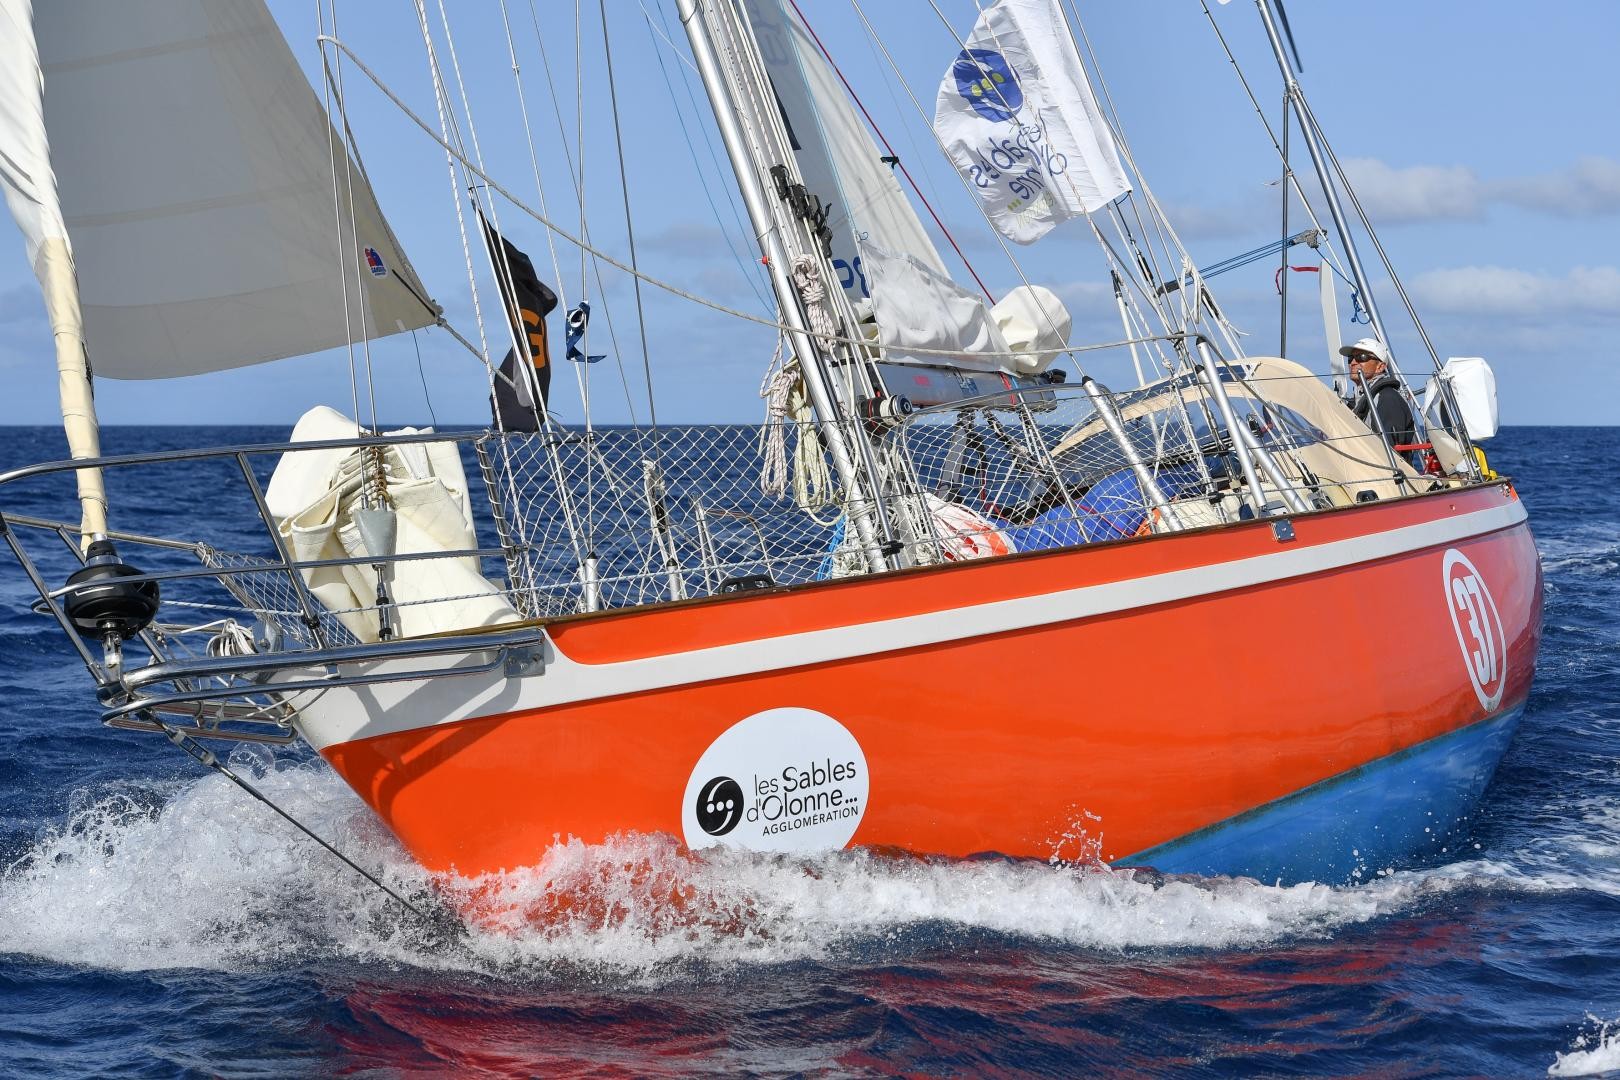 Istvan Kopar and his Tradewind 35 Puffin making good progress towards the Les Sables d'Olonne finish line today